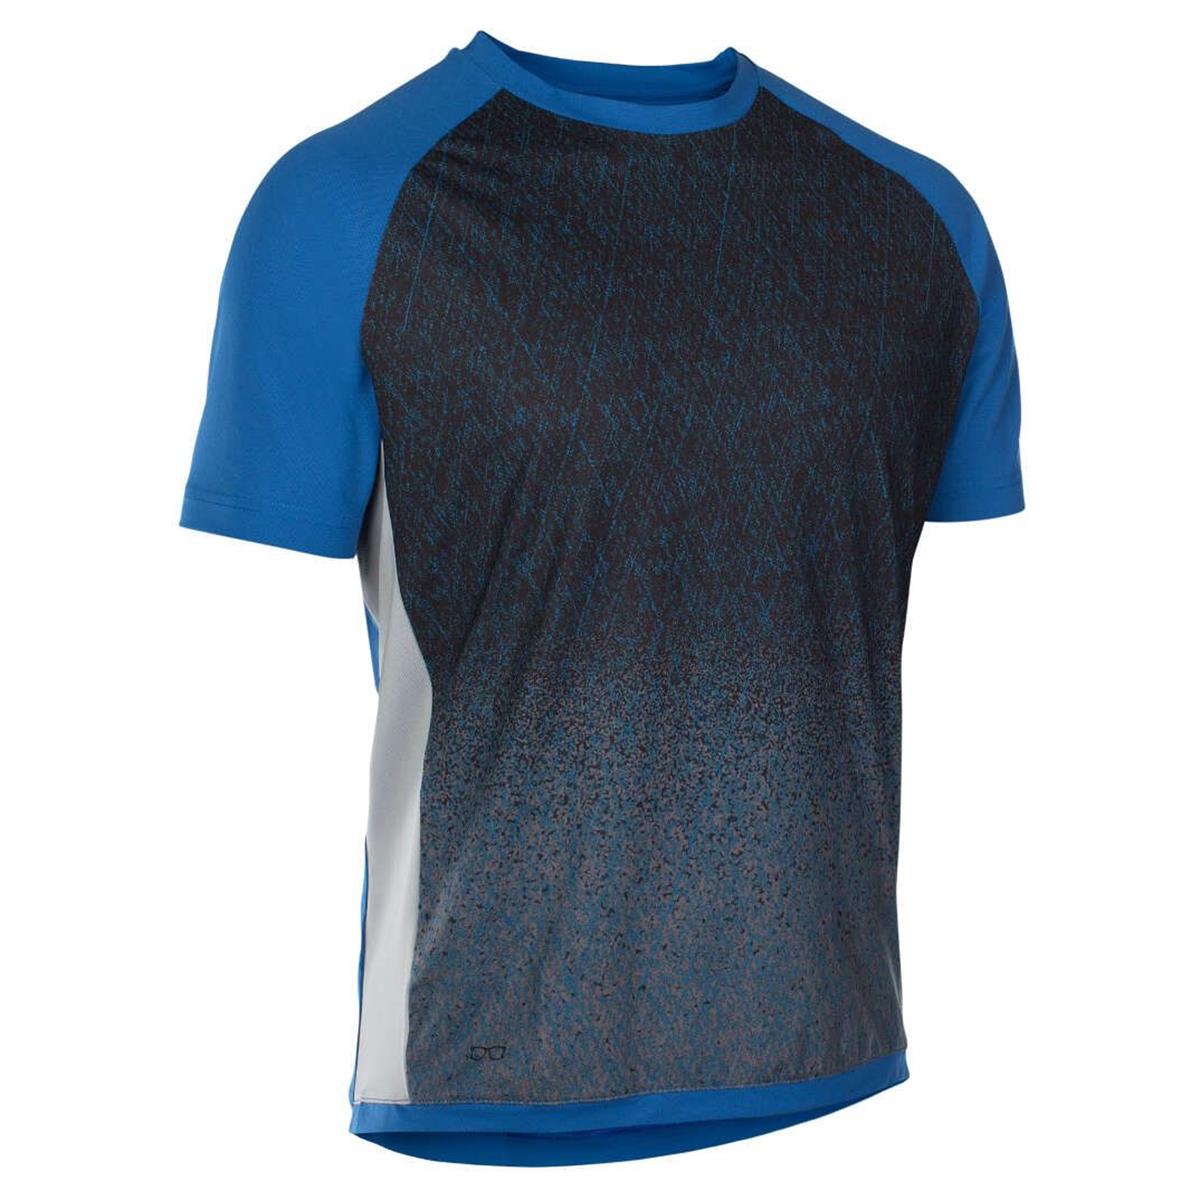 ION All Mountain Jersey Traze Amp Torrent Blue